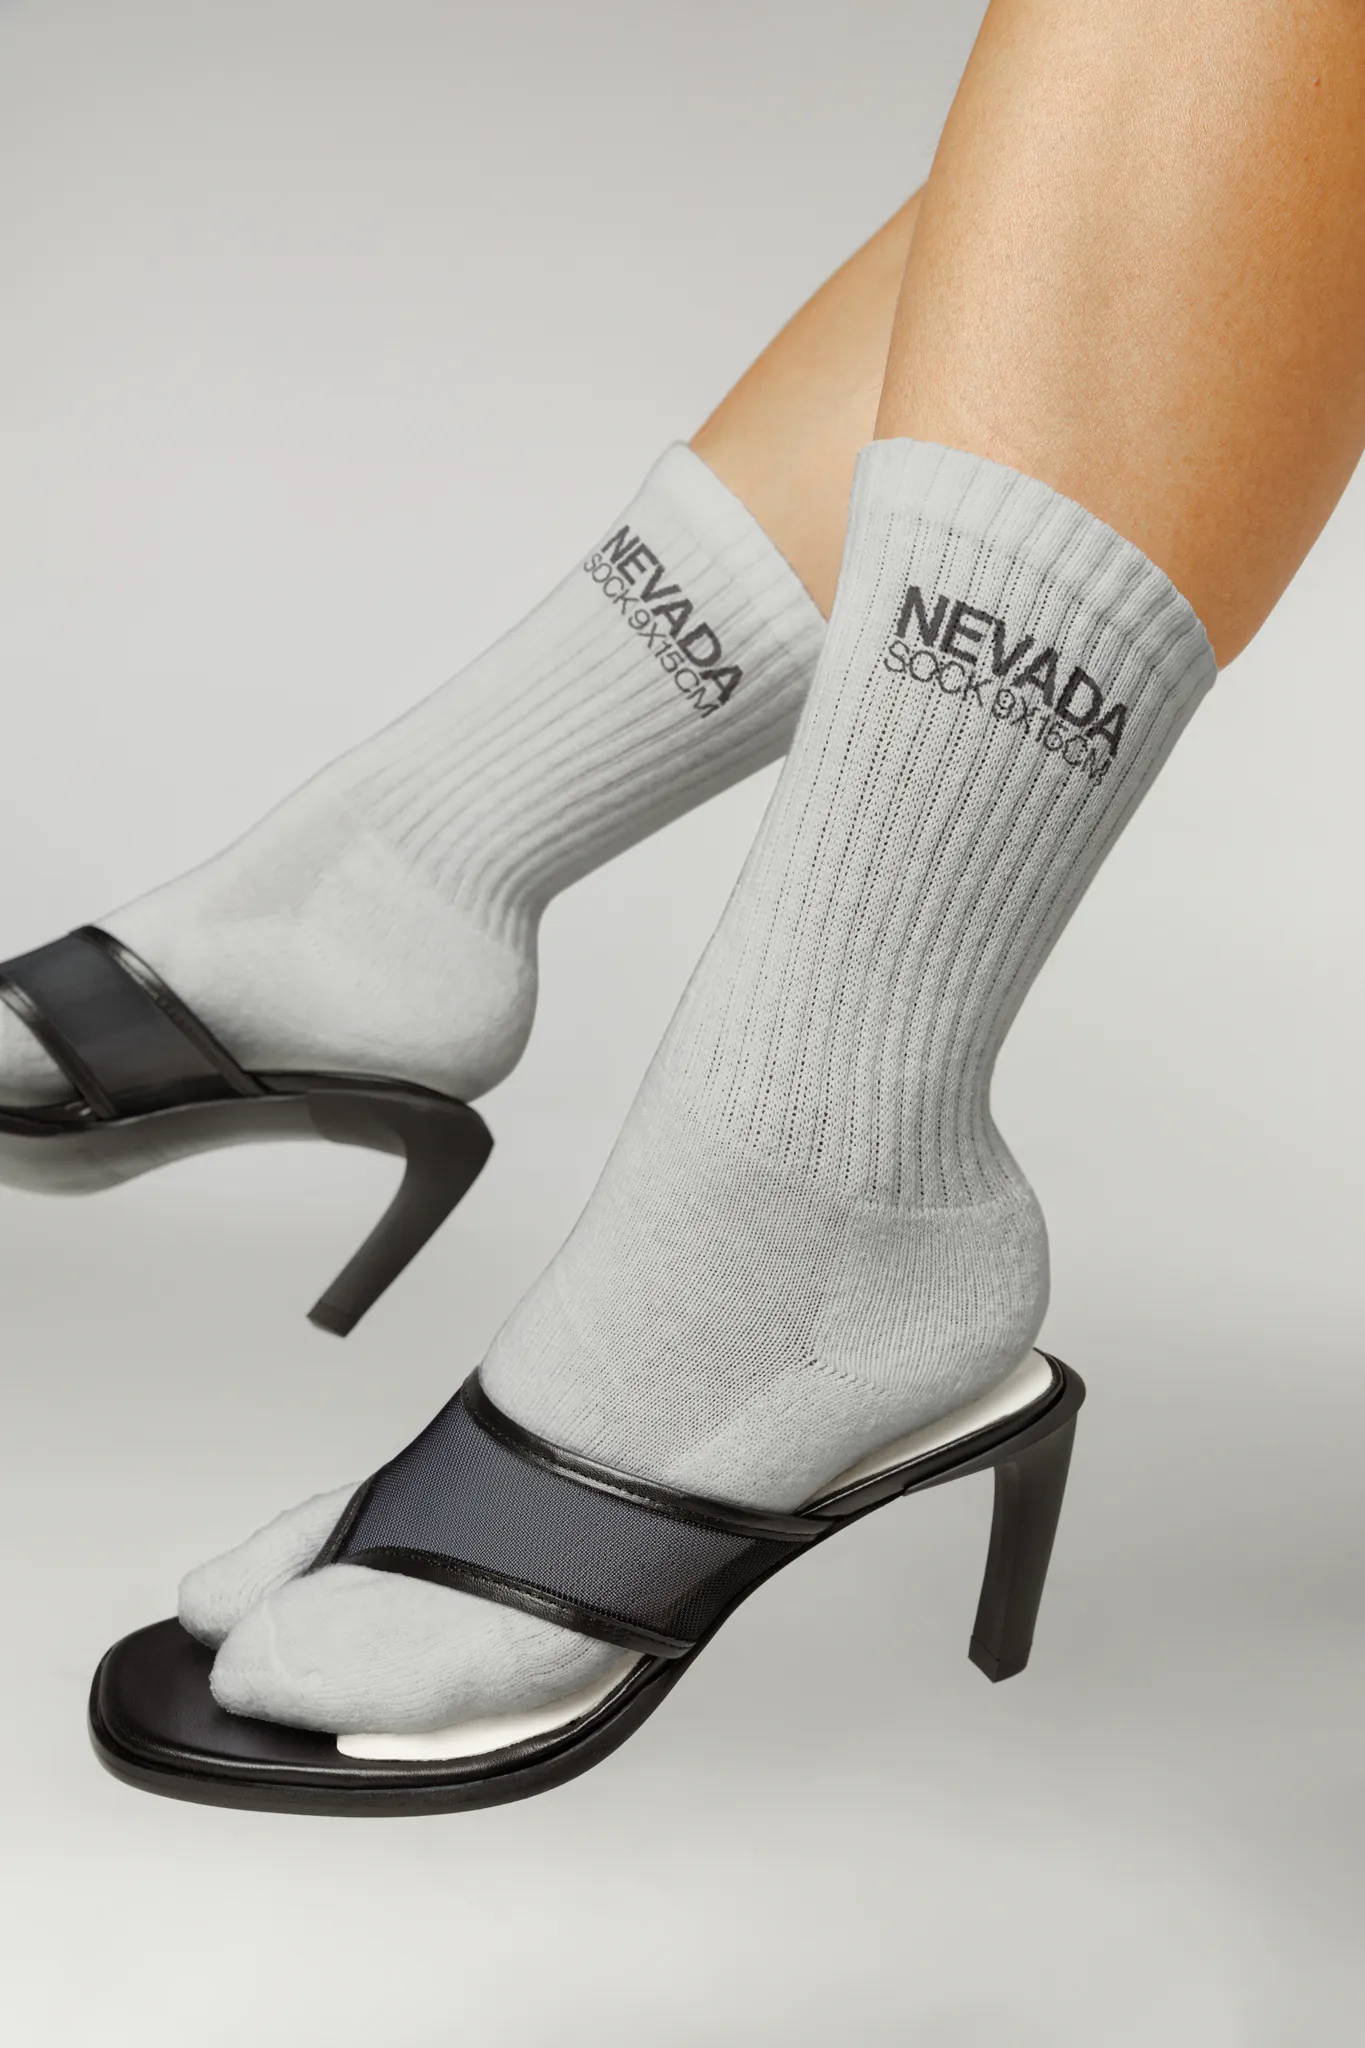 Close-up of the legs of a female wearing high sandals on white socks mockup, PSD file of white socks mockup, high fashion mockup, apparel mockup, white socks mockup, premium quality socks mockup.